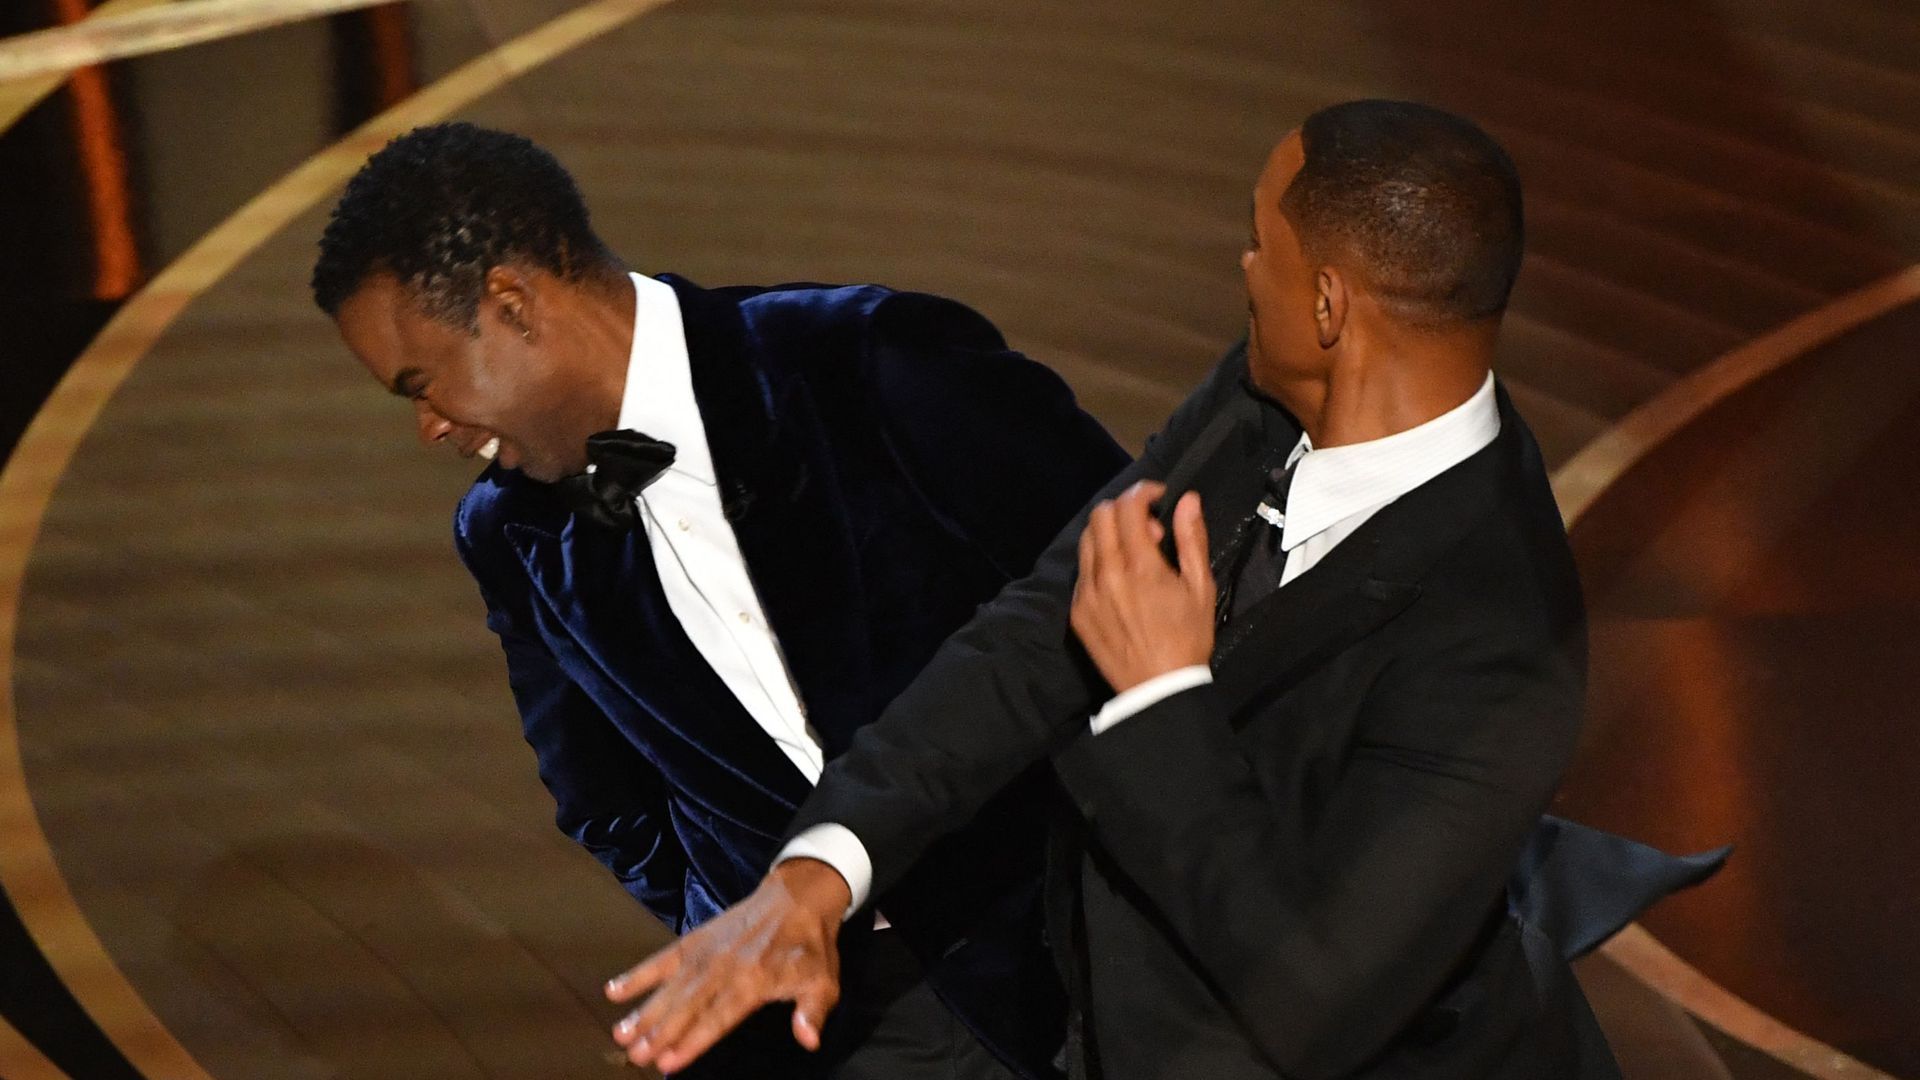 Will Smith slaps Chris Rock at the Academy Awards show